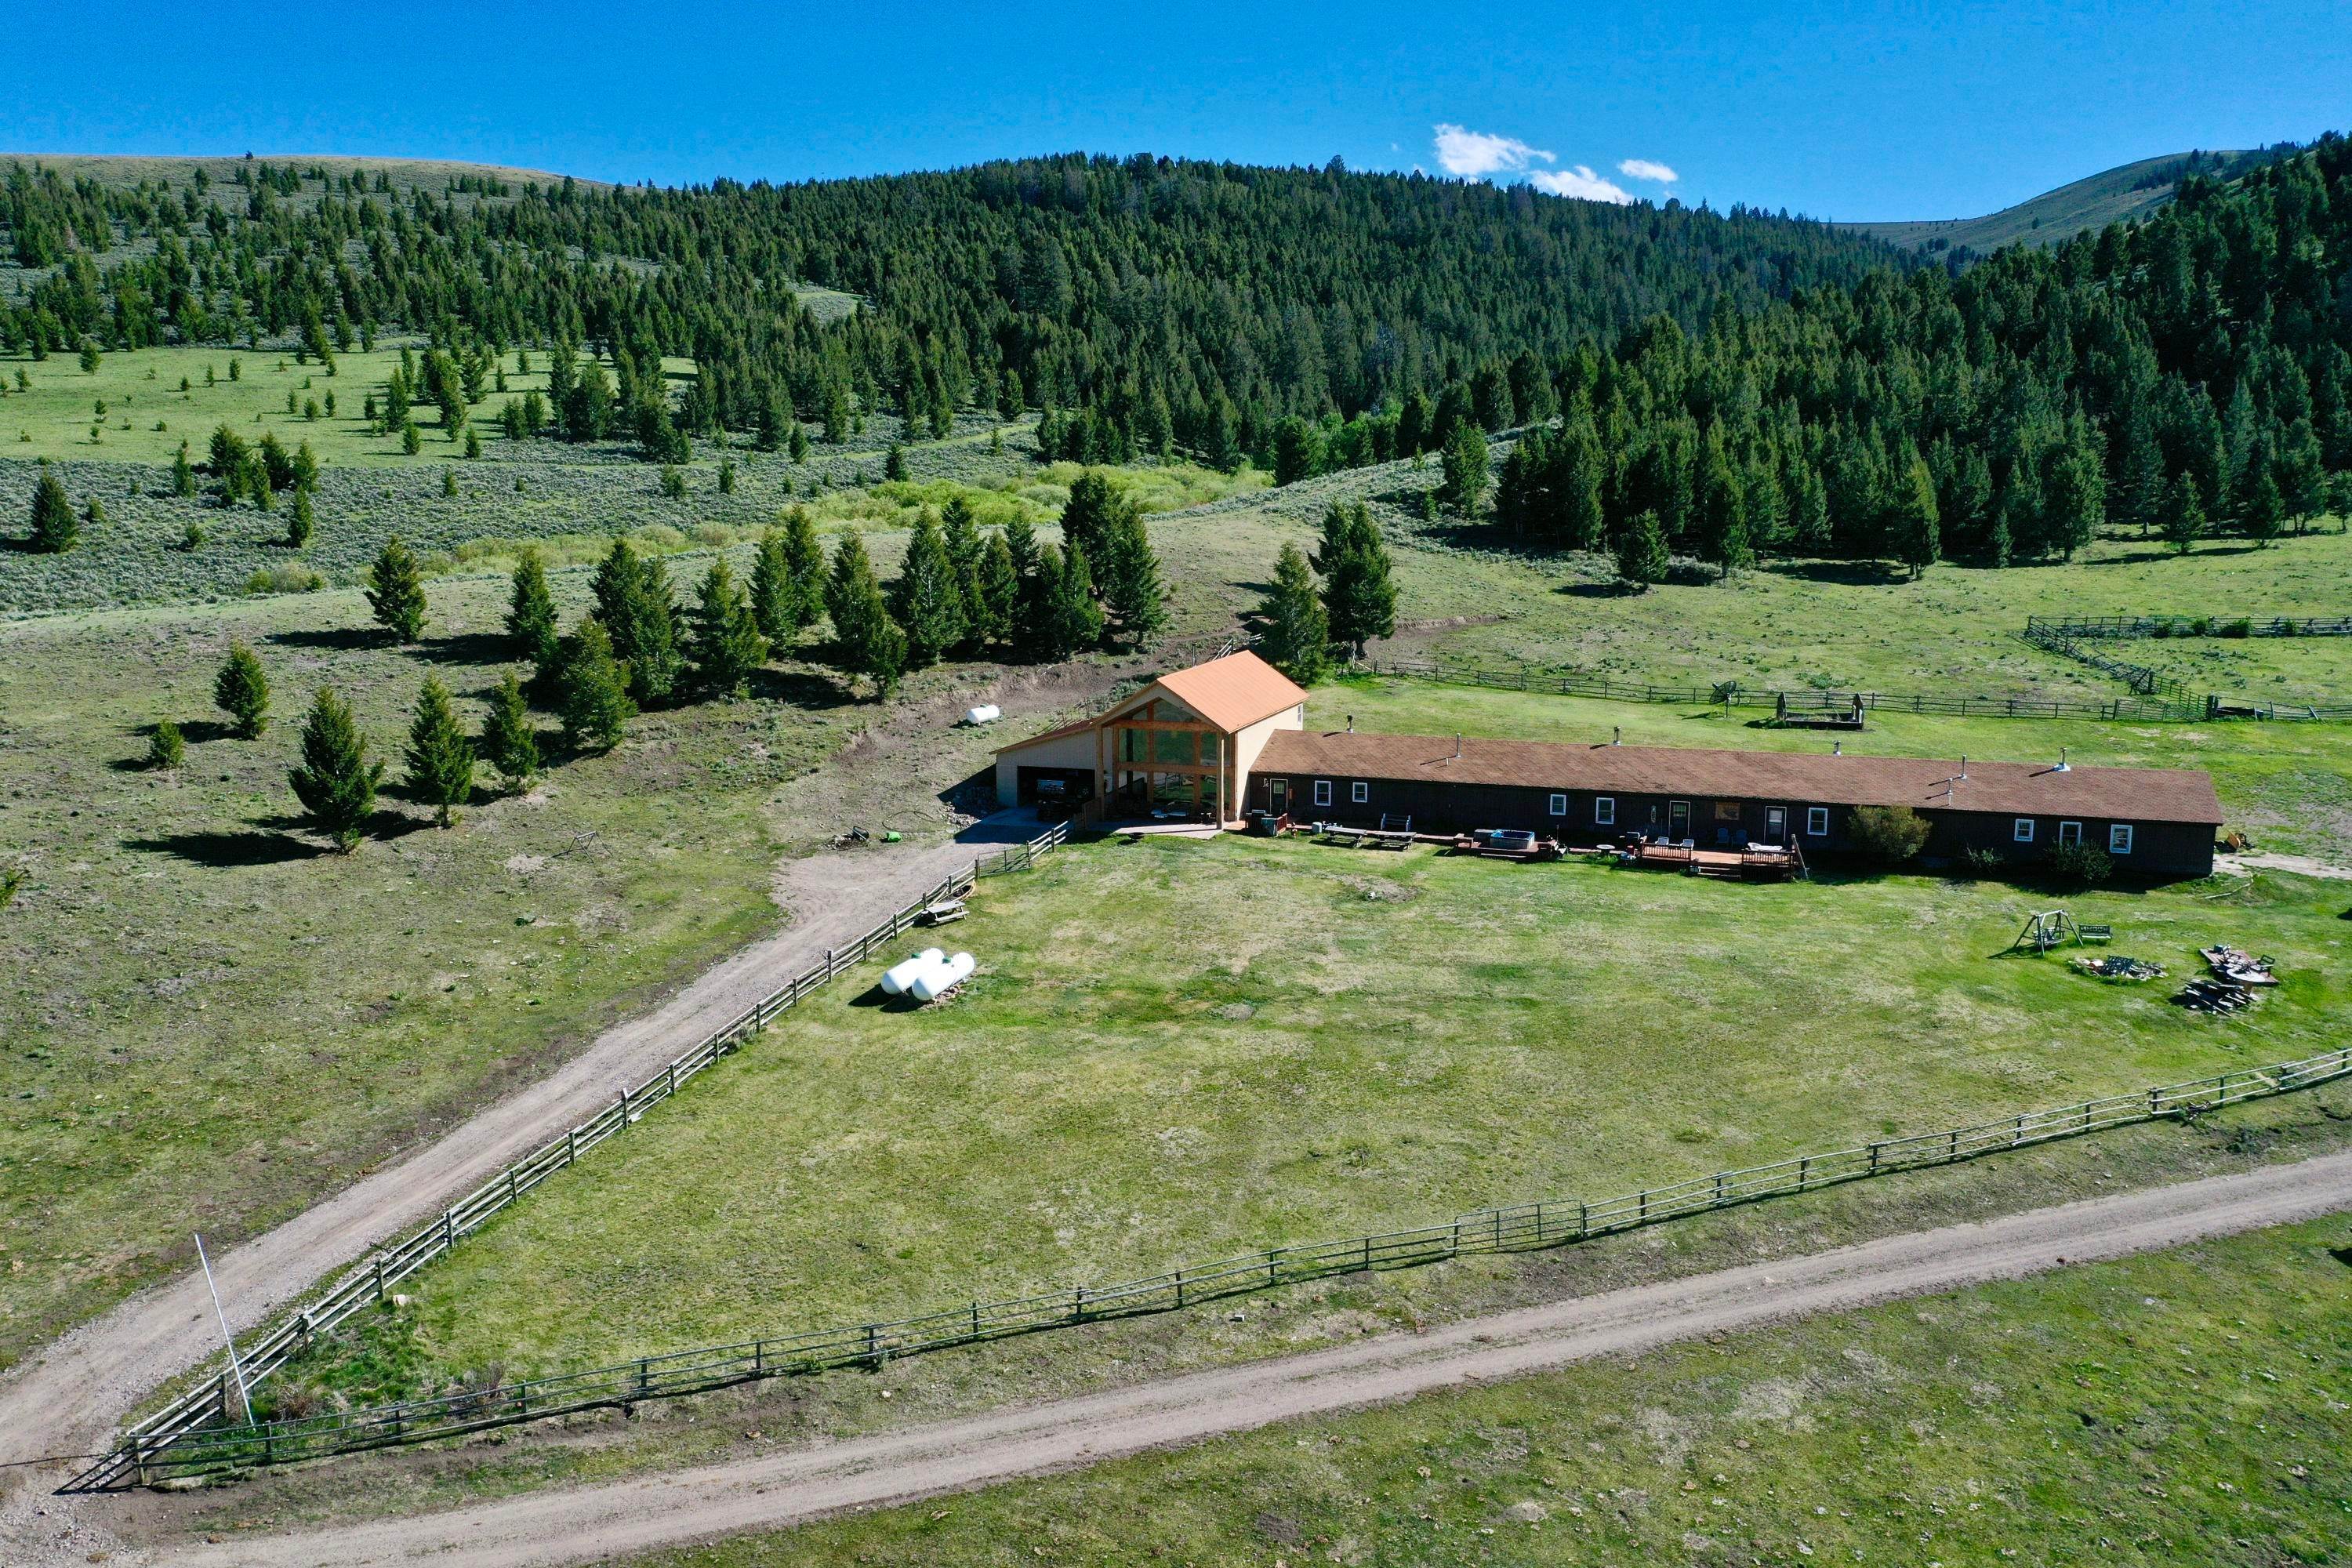 Farm / Agriculture for Sale at Address Not Available Address Not Available, Dillon, Montana 59725 United States